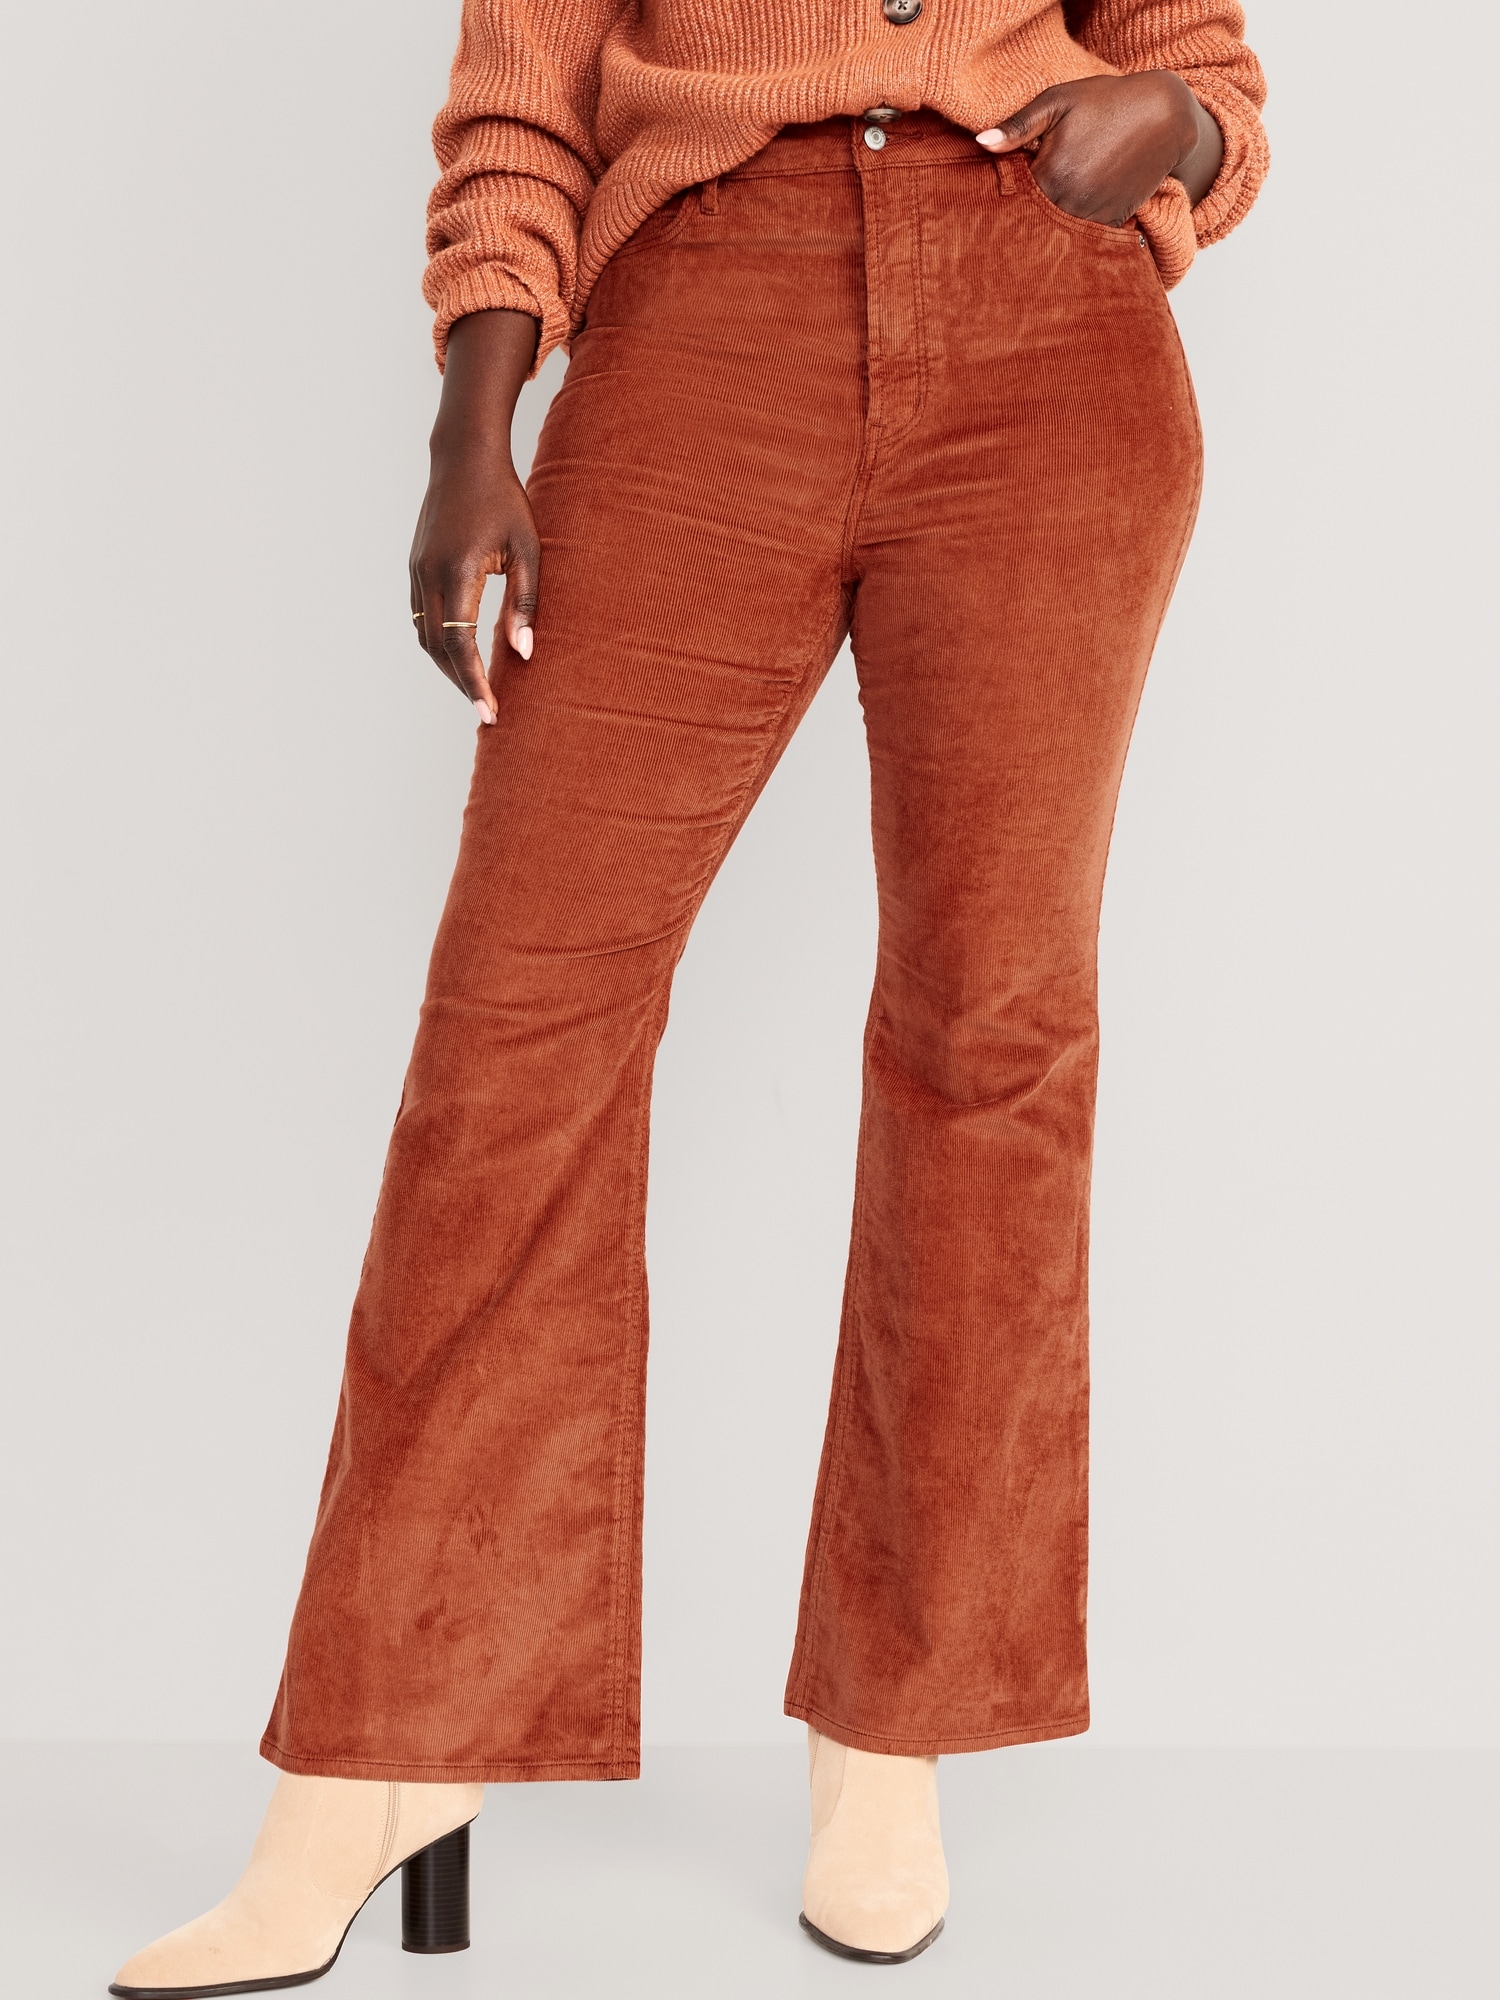 Women's High Waisted Multiple Pockets Corduroy Casual Flare Pants